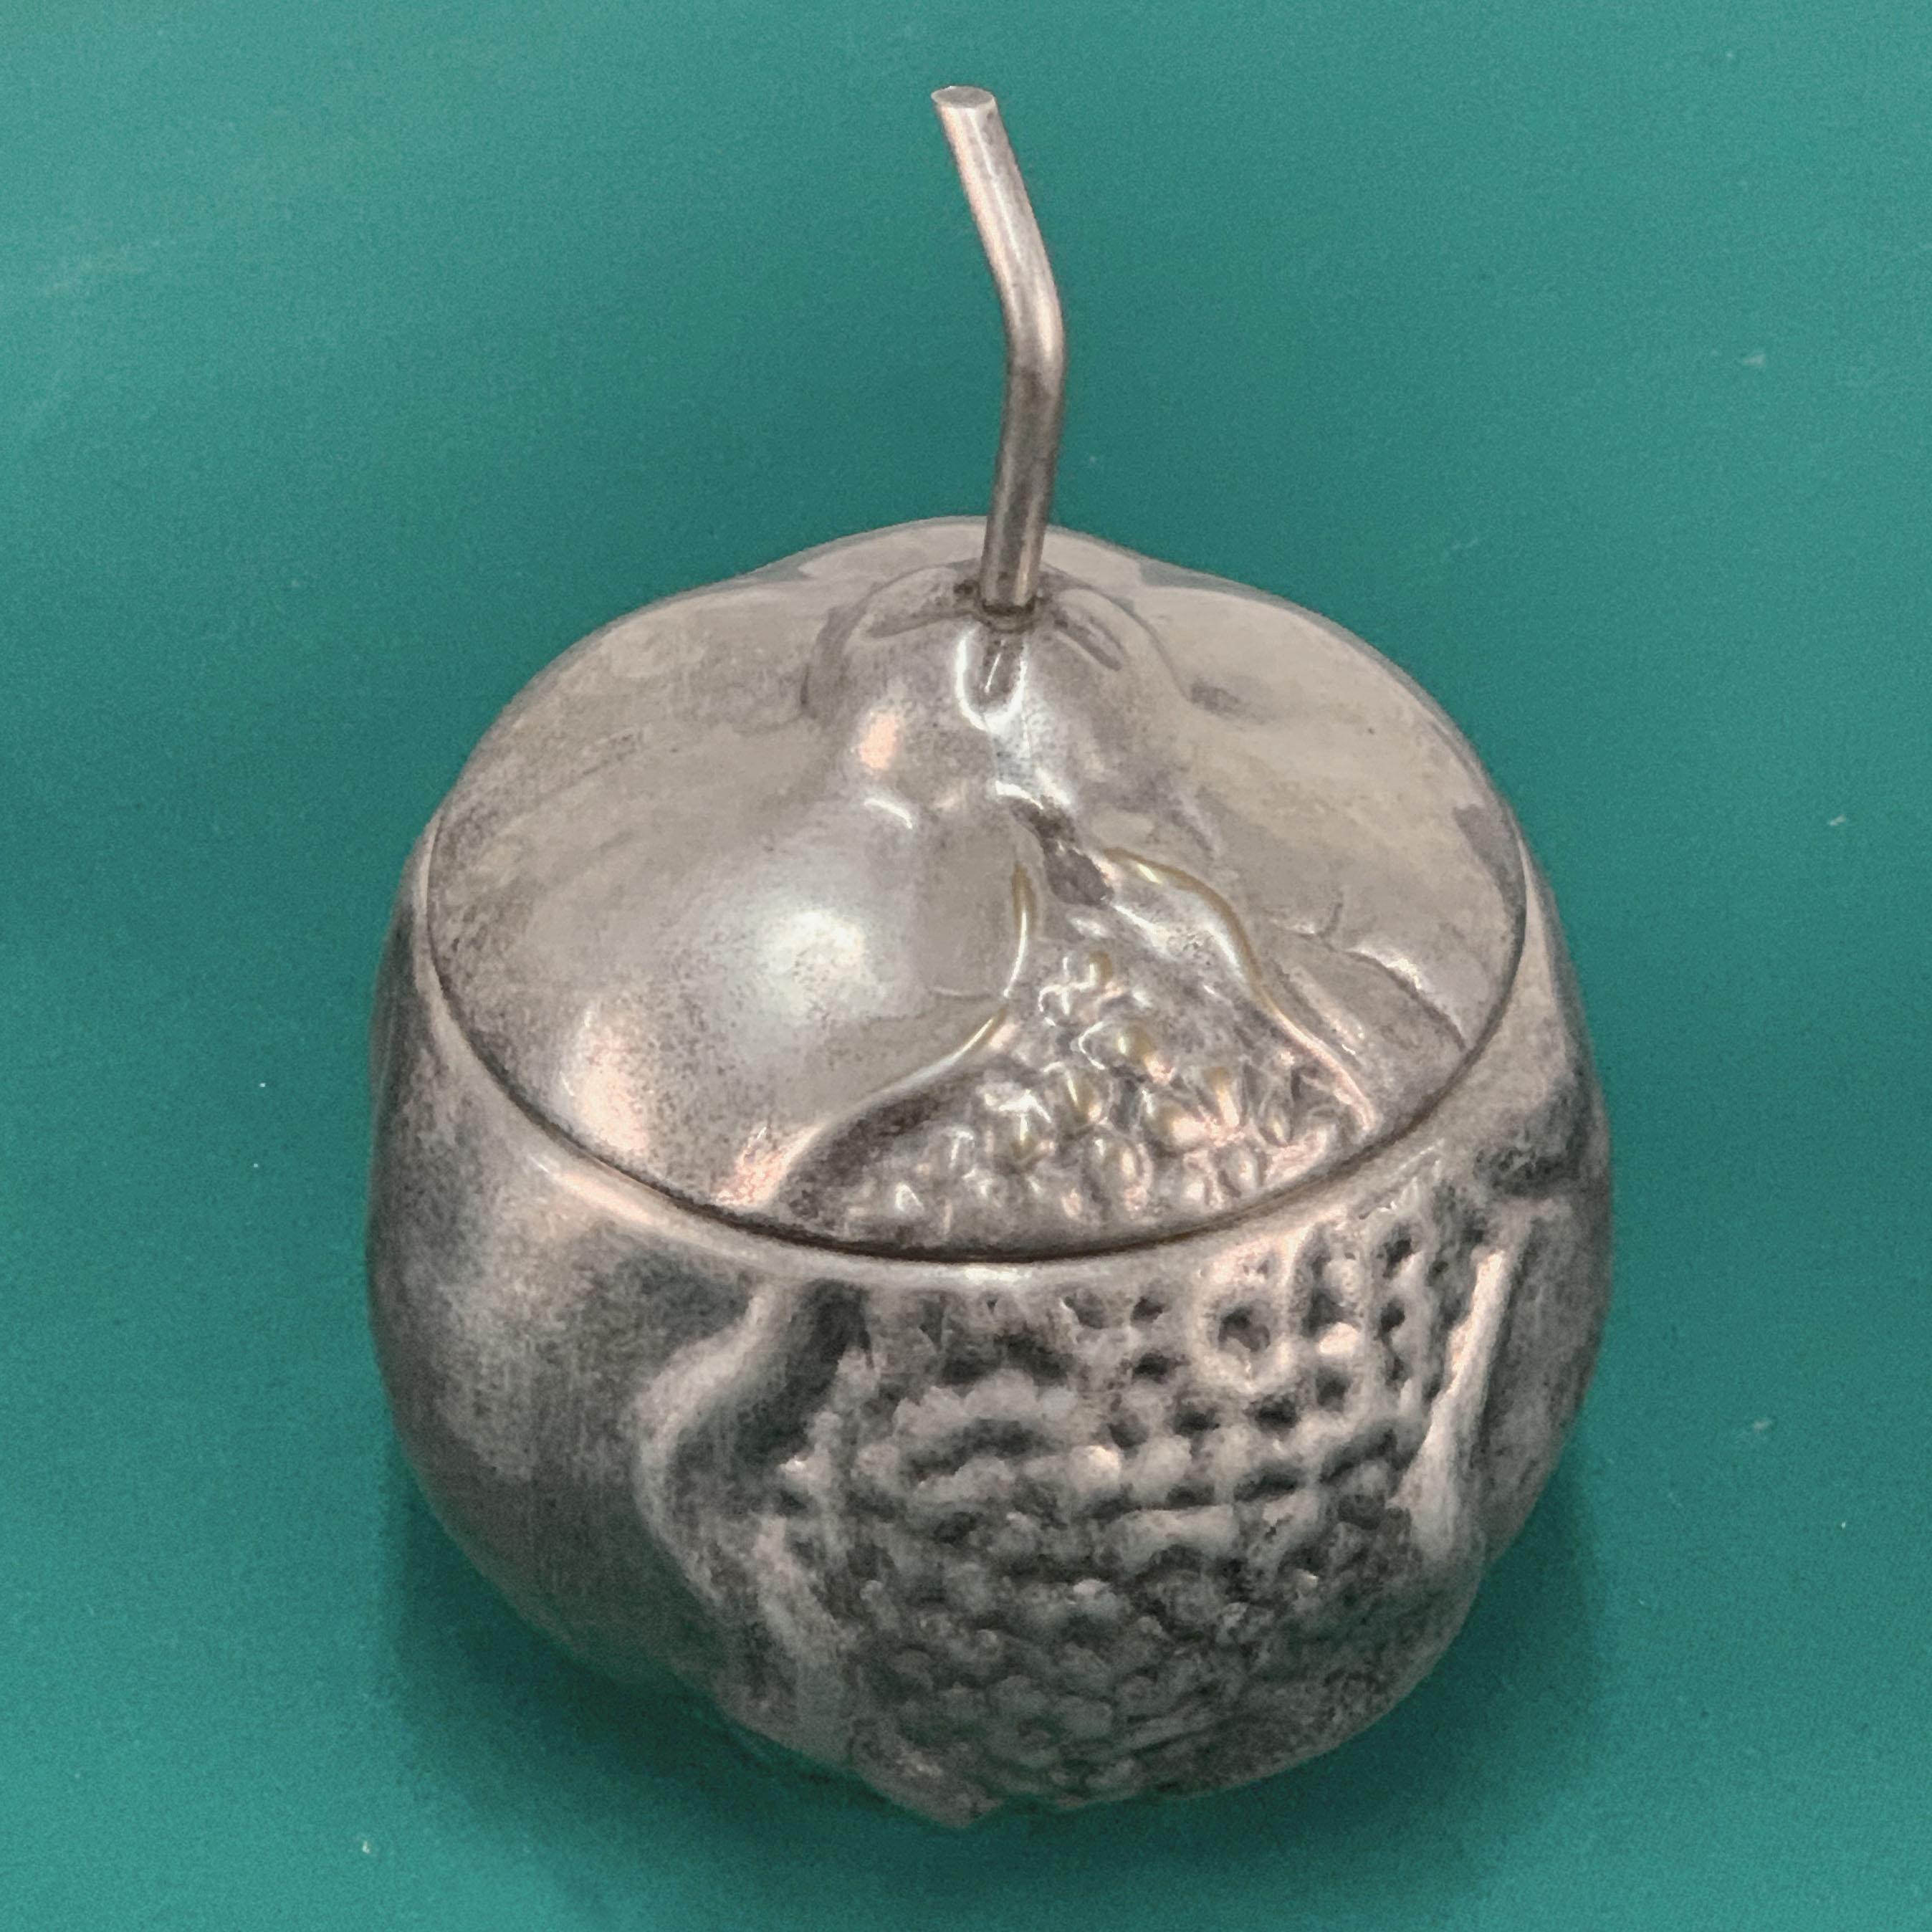 A wonderful midcentury silver plate wine cooler produced in Florence, Italy during the 1960s by Teghini Firenze.

It has the shape of pomegranate and of two pieces, the top can be removed by pulling the petiole.

A wonderful, stylish and elegant